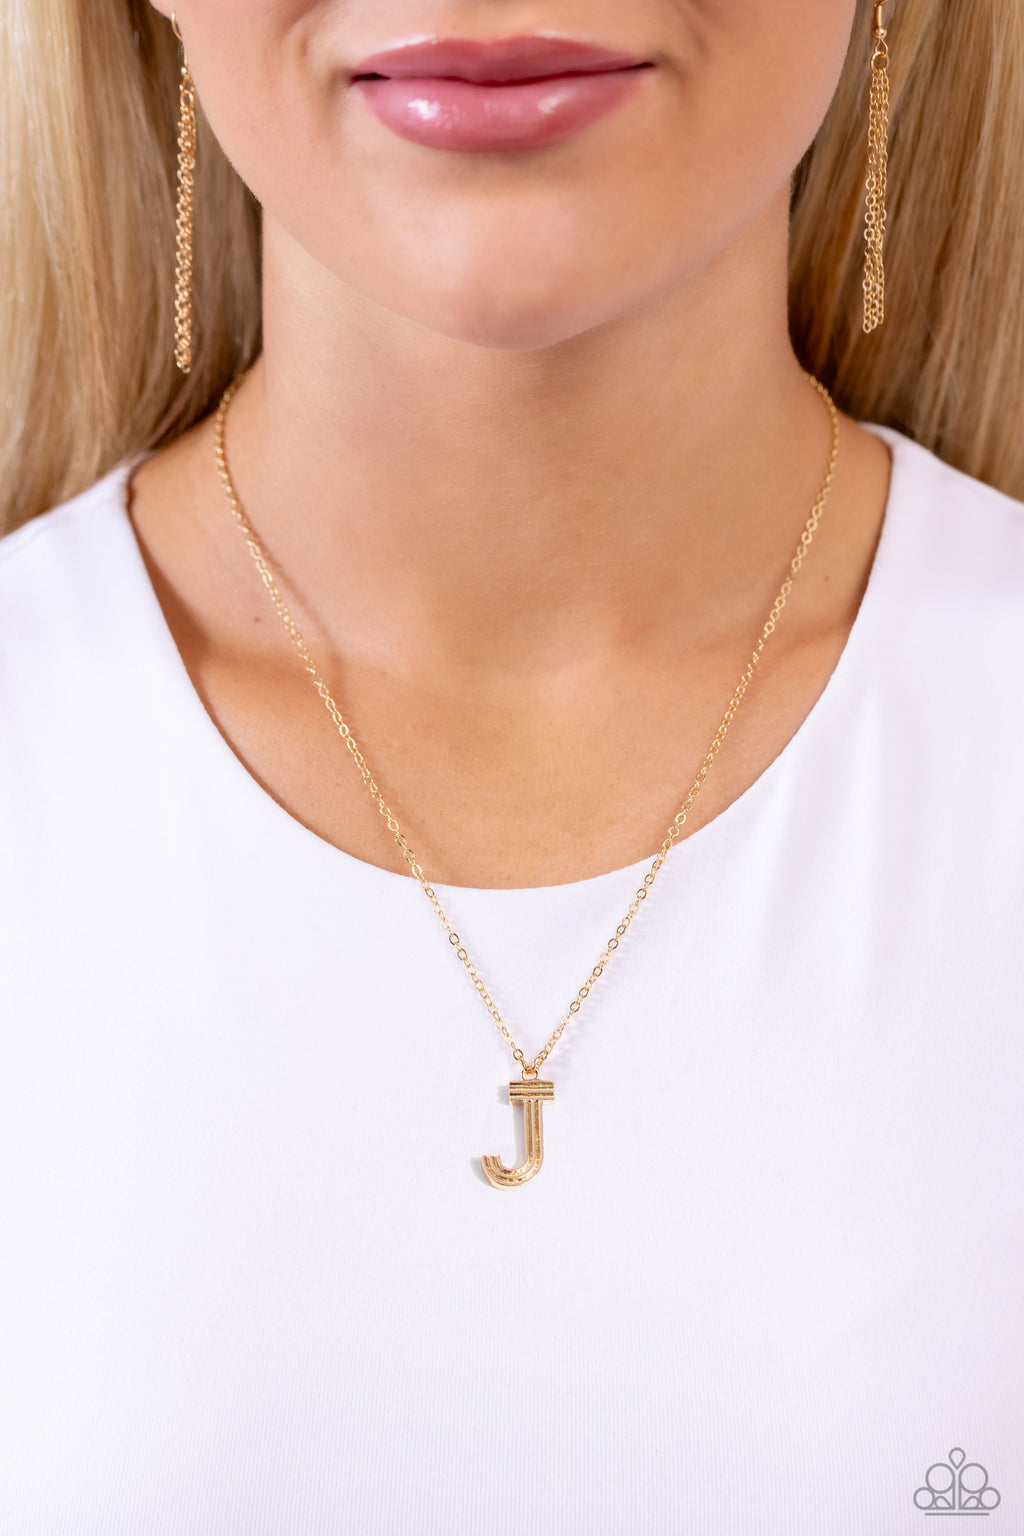 Paparazzi - Leave Your Initials - Gold - J Necklace